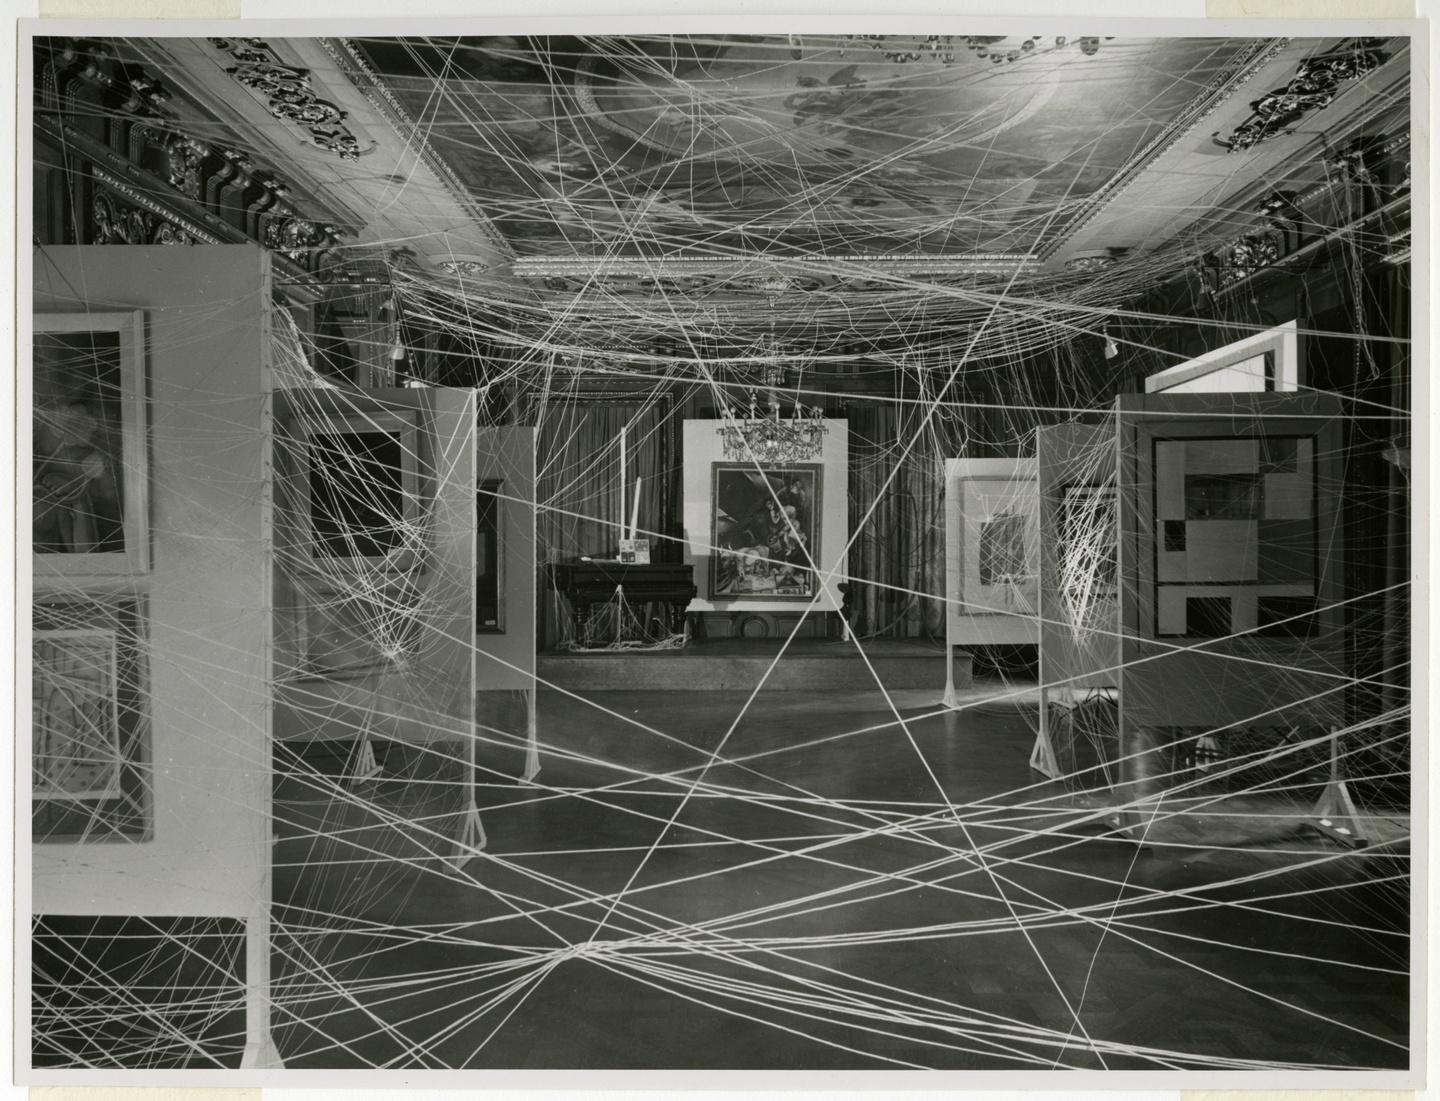 Black-and-white photo of a gallery space with string strung throughout